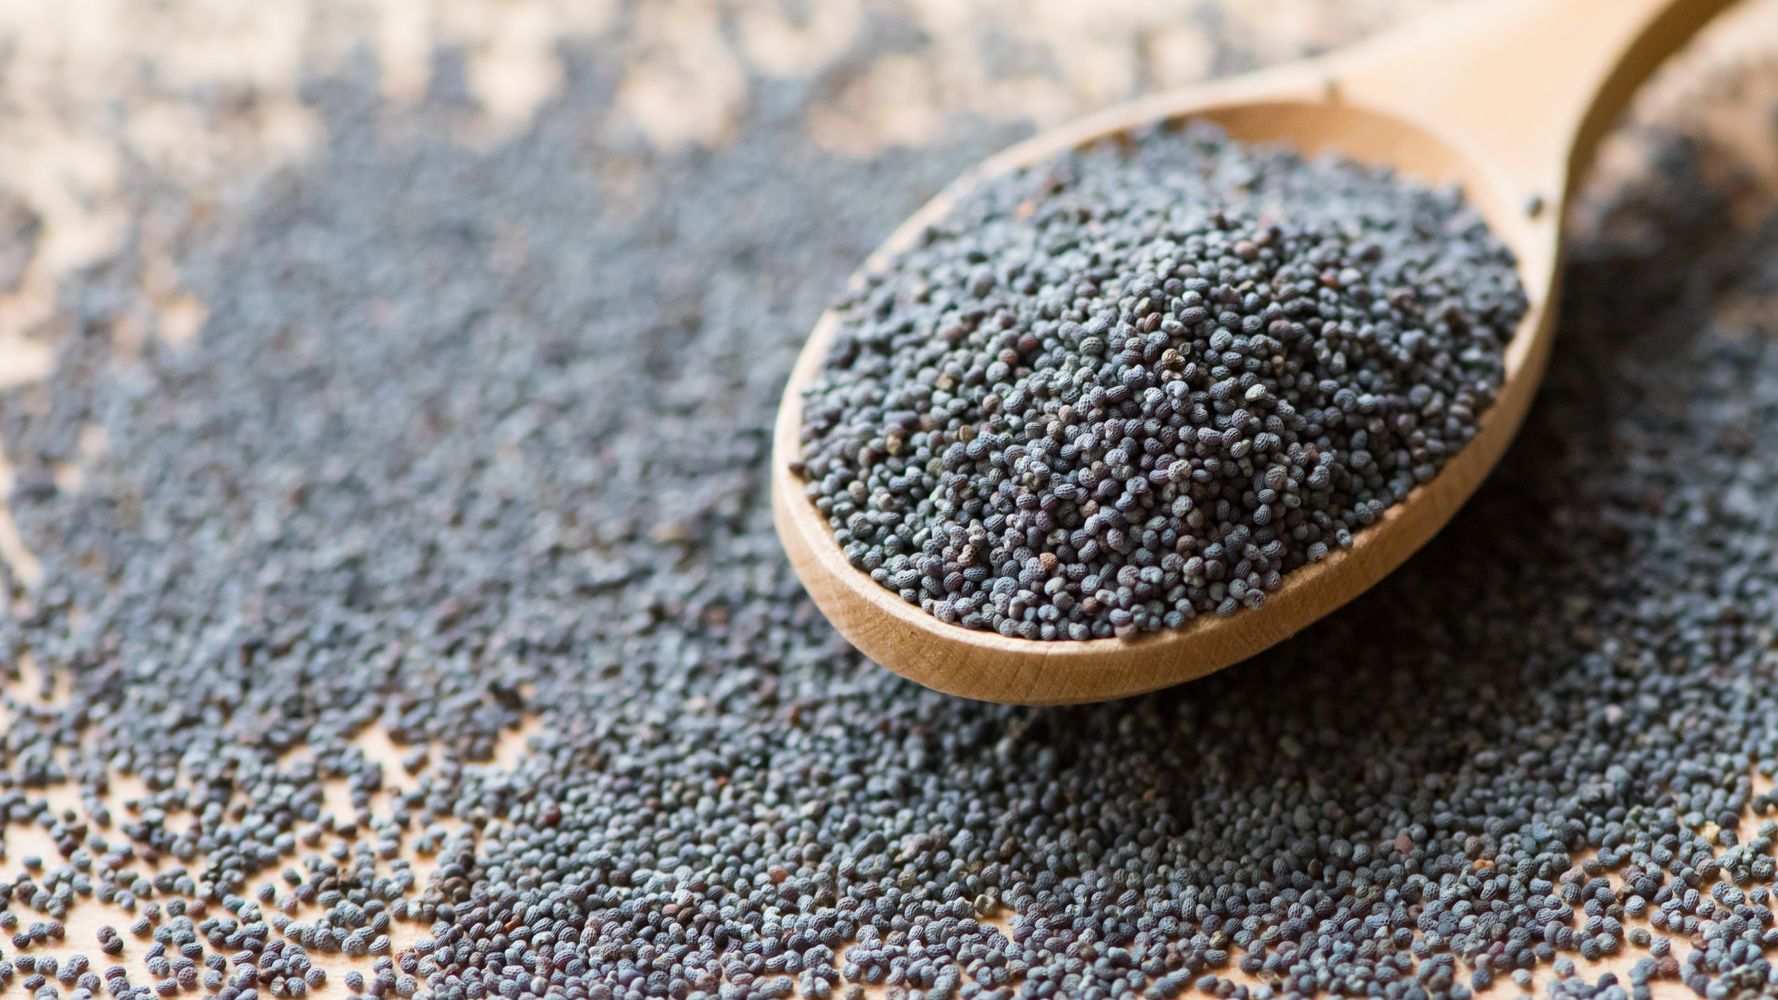 Poppy Seeds 8 oz - Natural Zing